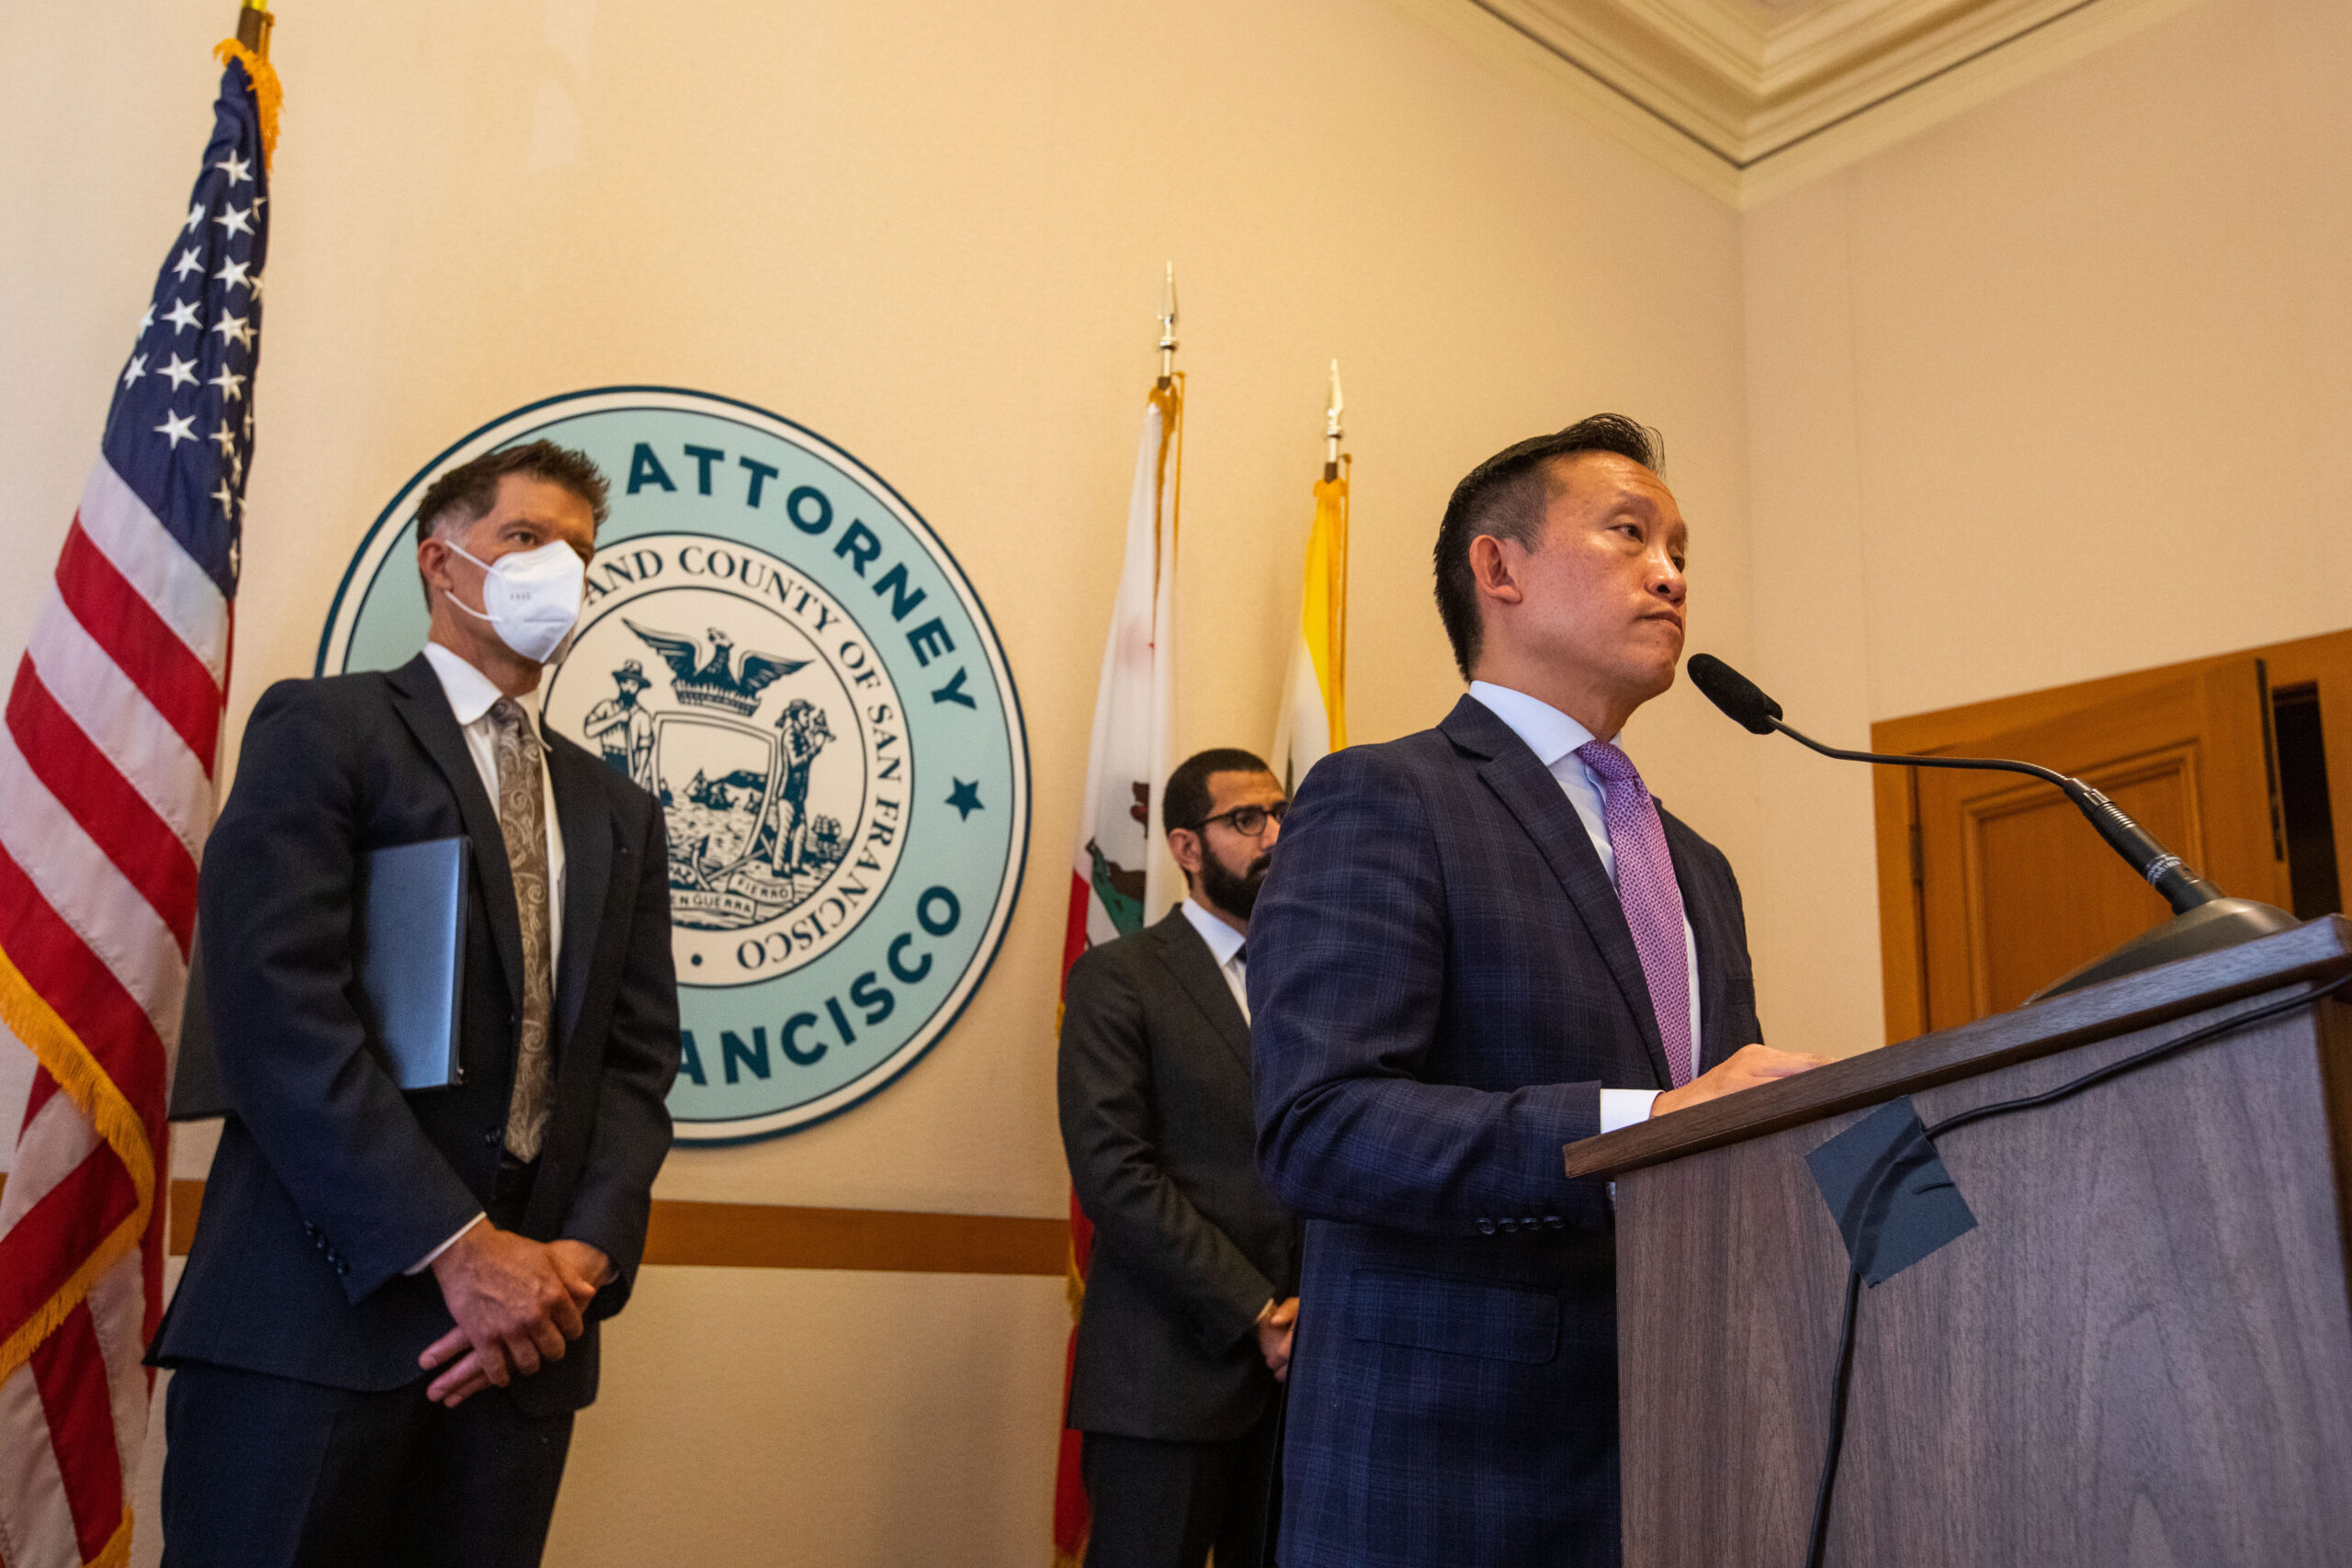 Companies Linked to San Francisco Corruption Scandal Banned From City Contracting